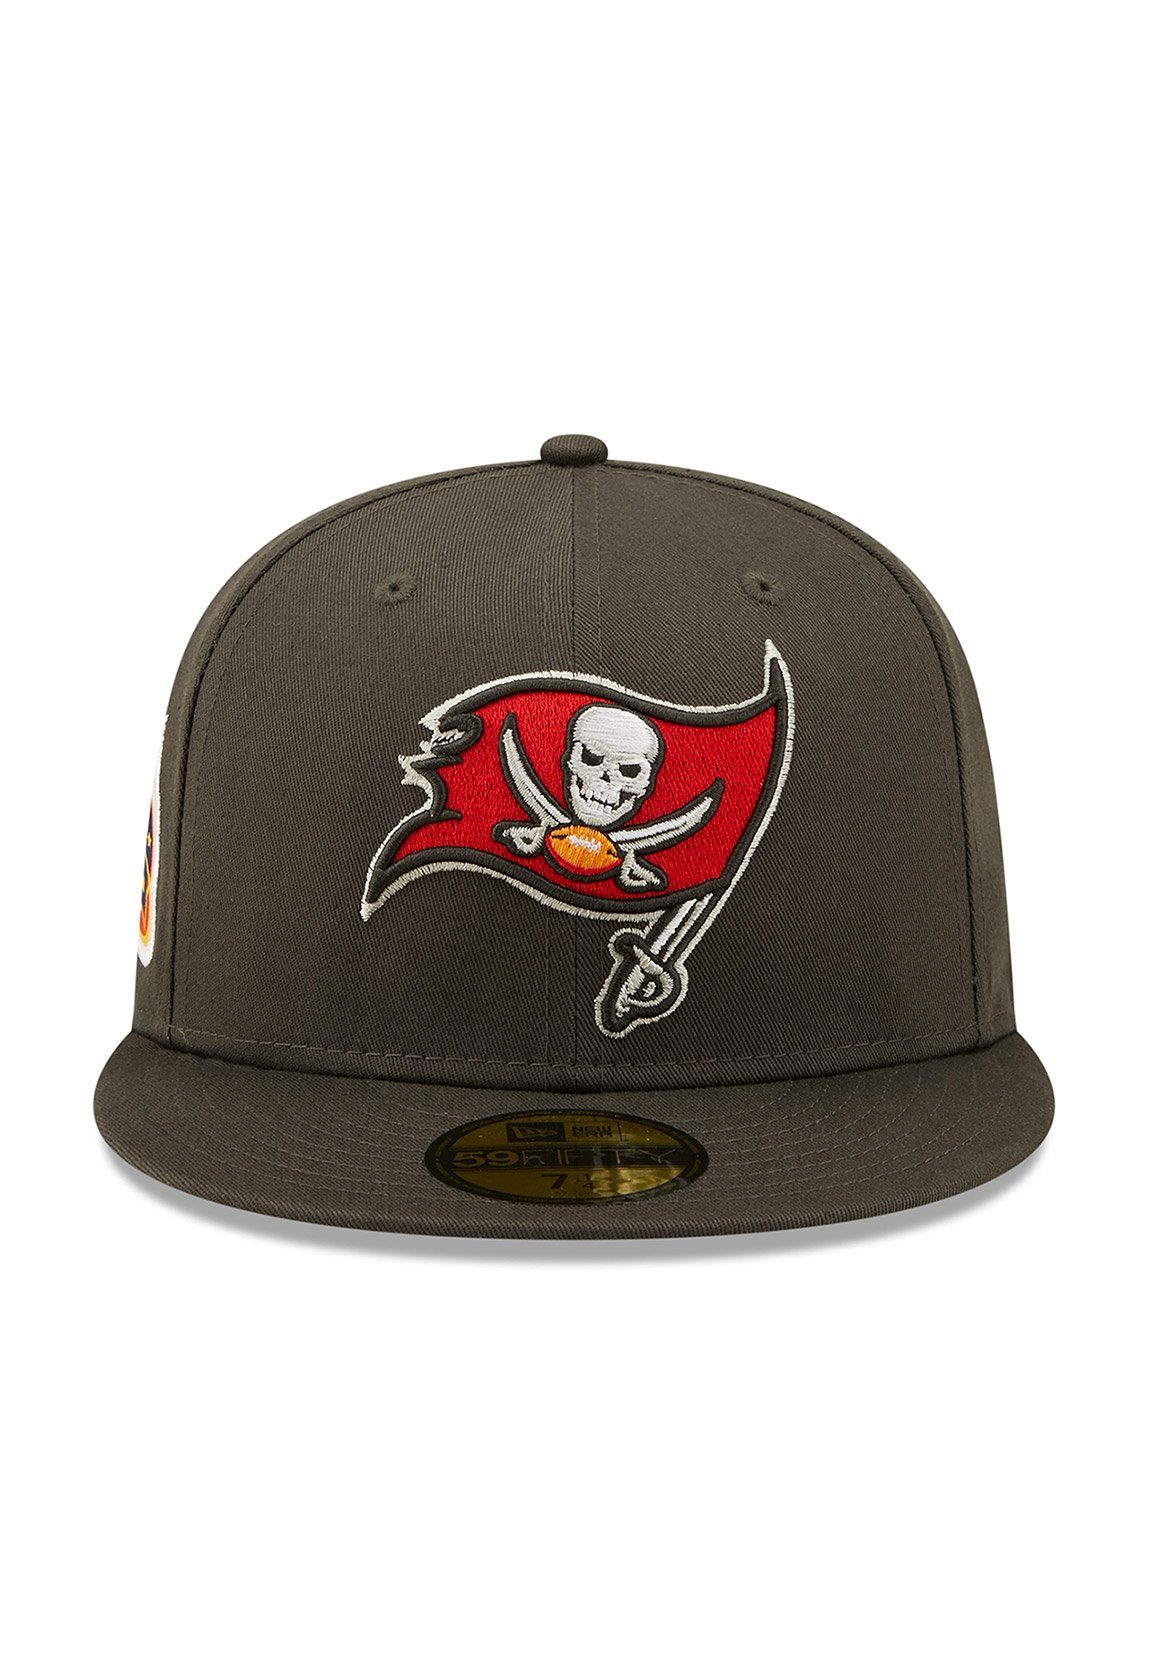 Patch Fitted Cap Grau New TAMPA BAY Era New Side Charcoal 59Fifty BUCCANEERS